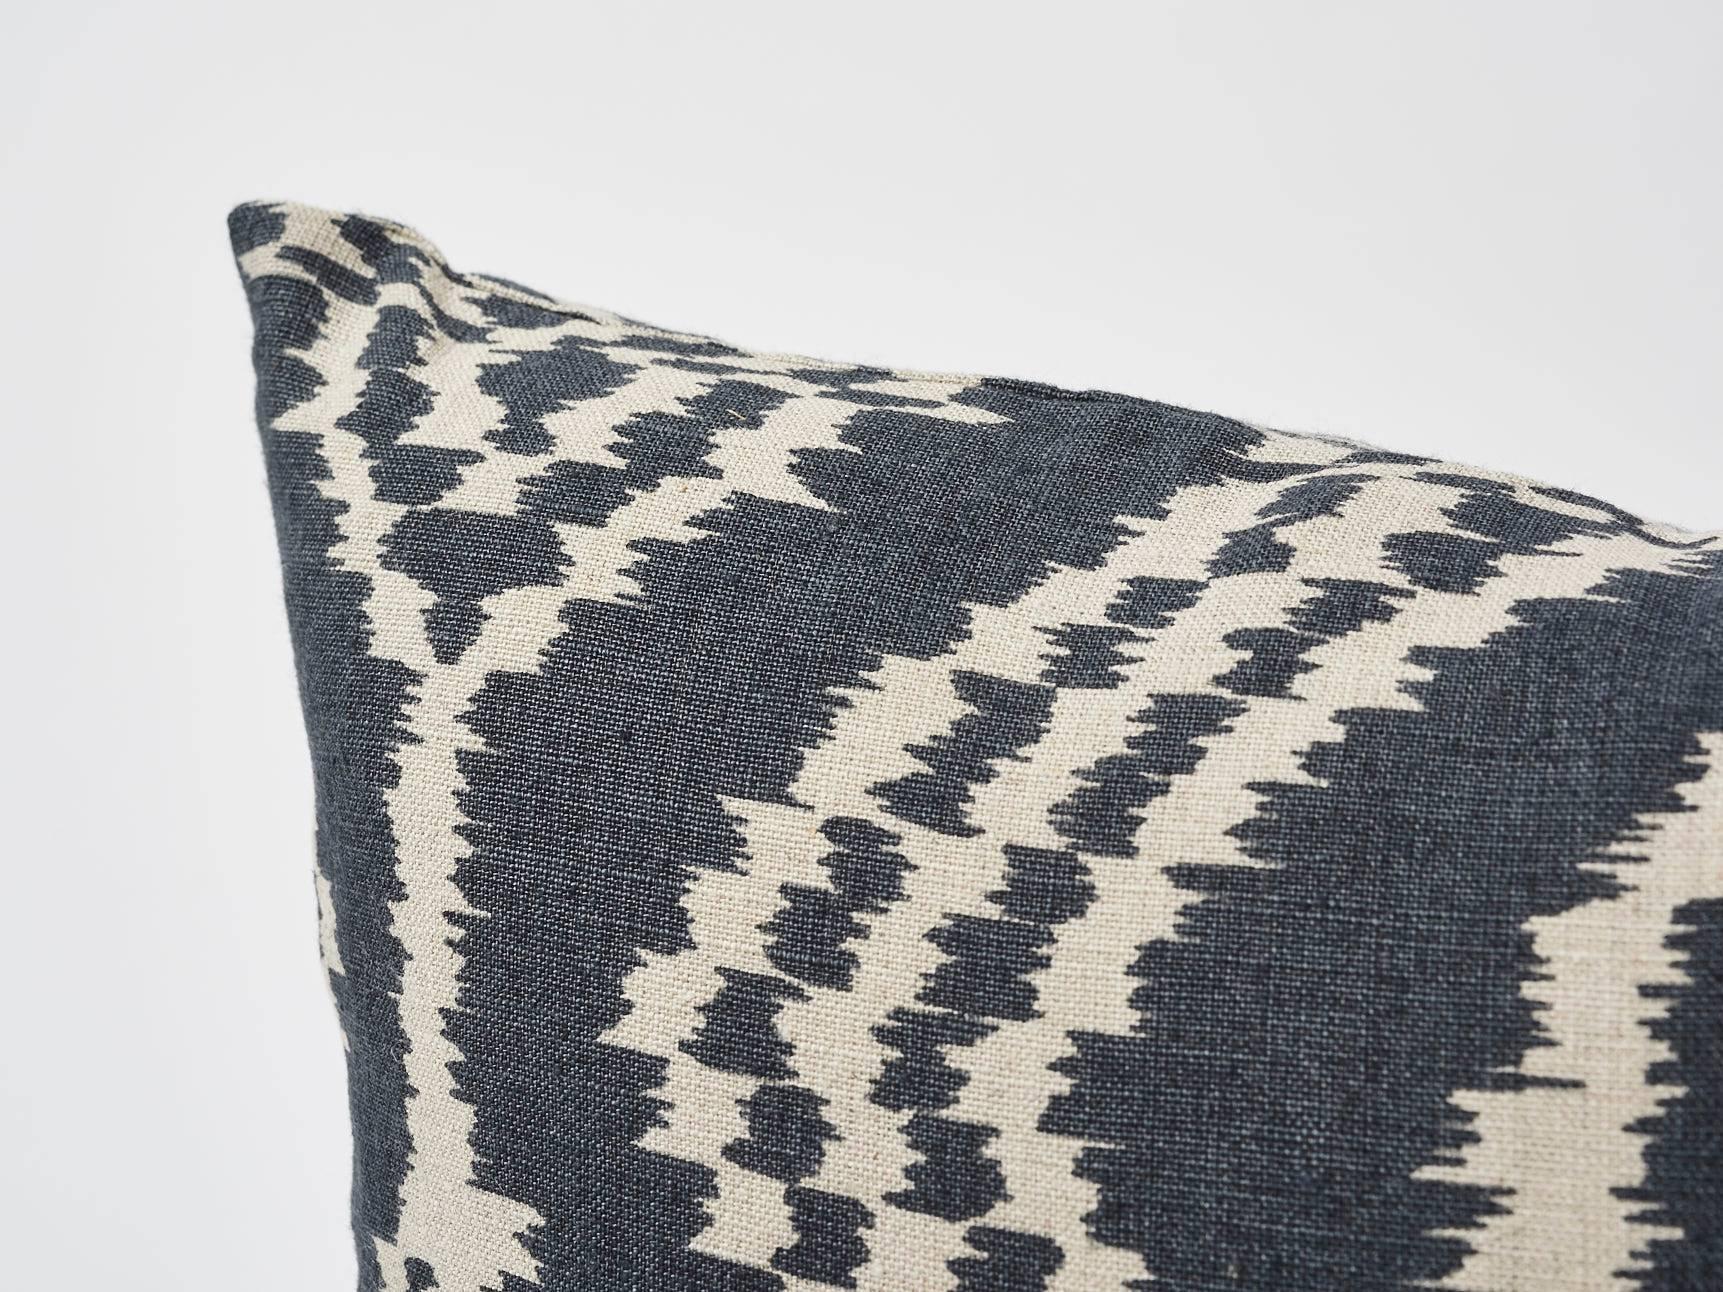 This sophisticated yet relaxed, contemporary Schumacher Ikat is printed on unbleached linen. The substantial weight and versatile palette of this decorative accent is great for luxuriously layering and mixing with other various interior patterns and